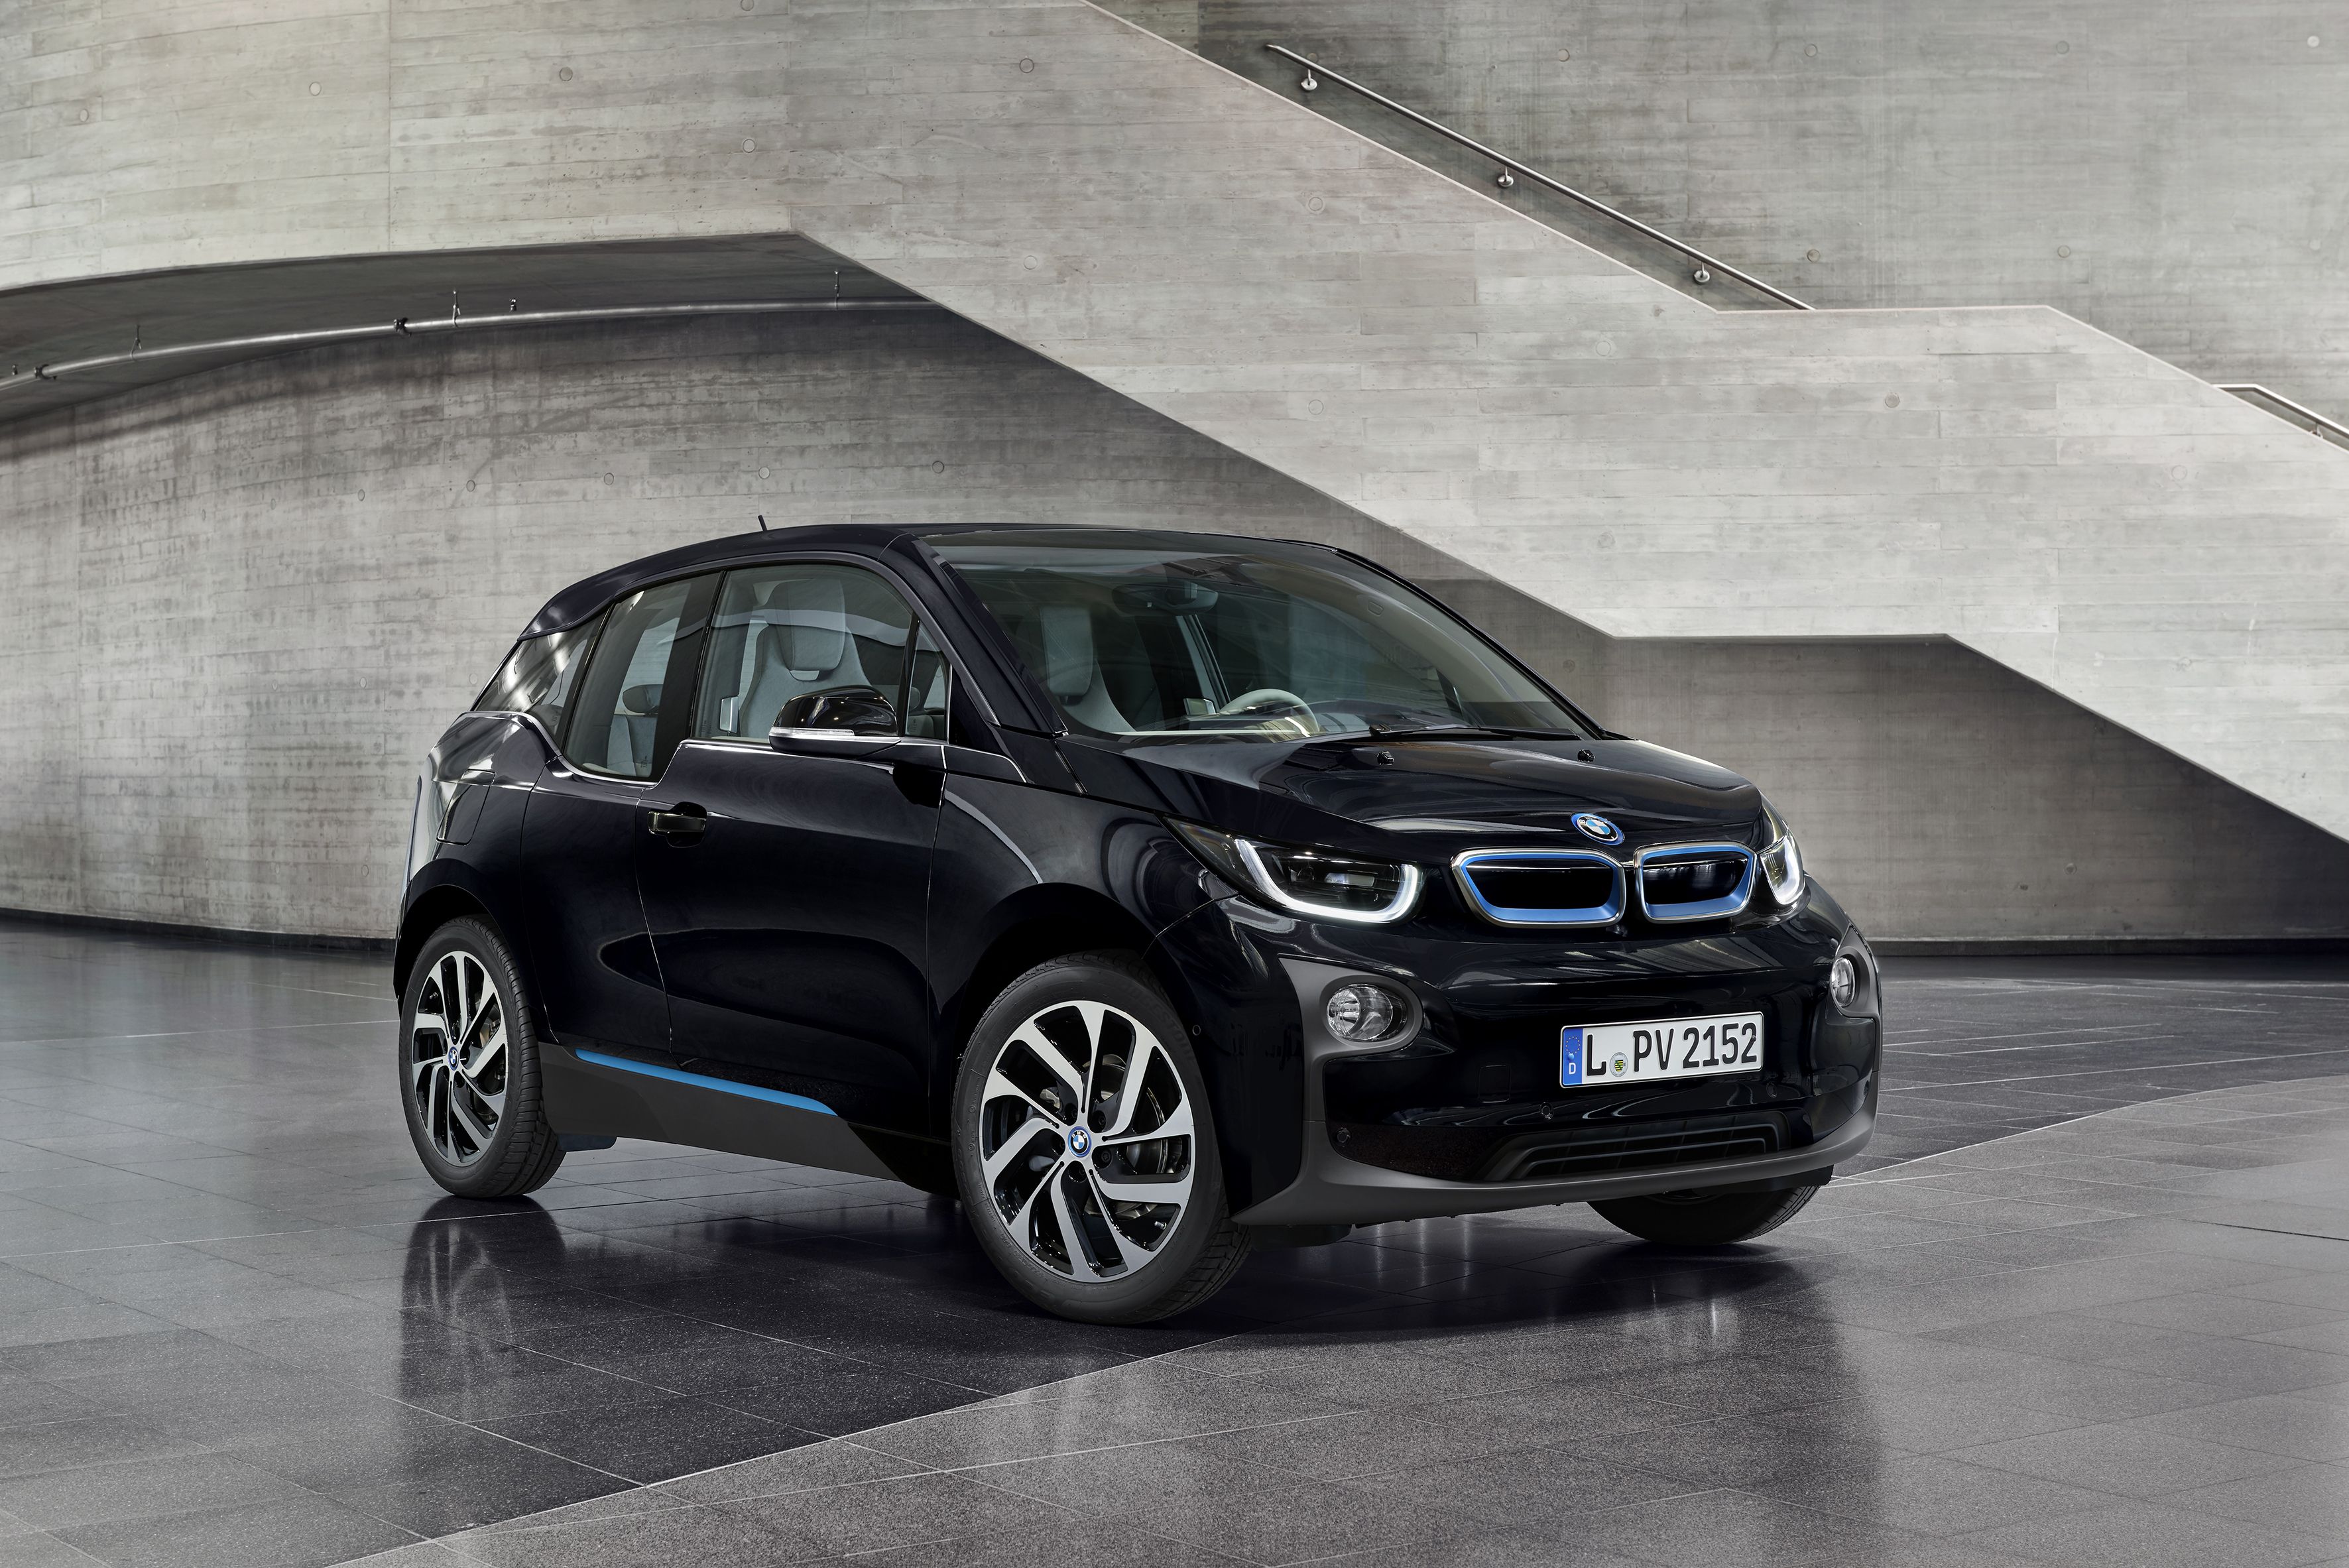 BMW i3 range will be increased in 2016 with a new battery